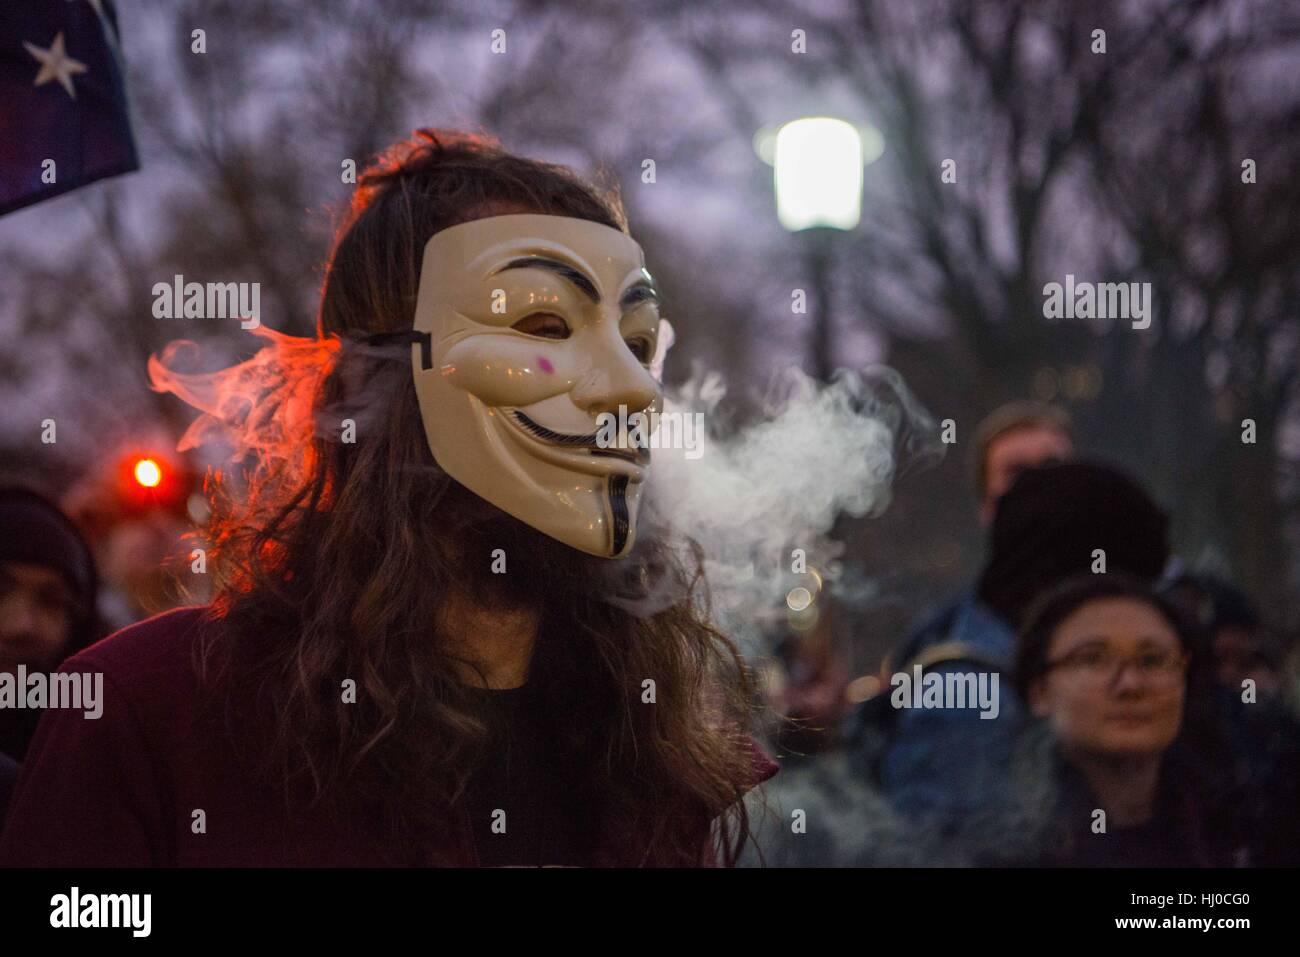 Protestors at the inauguration of President Donald Trump in Washington, D.C. A young Caucasian man wearing a Guy Fawkes mask exhales e-cigarette vapors, as he participates in protest activities in a park. Stock Photo